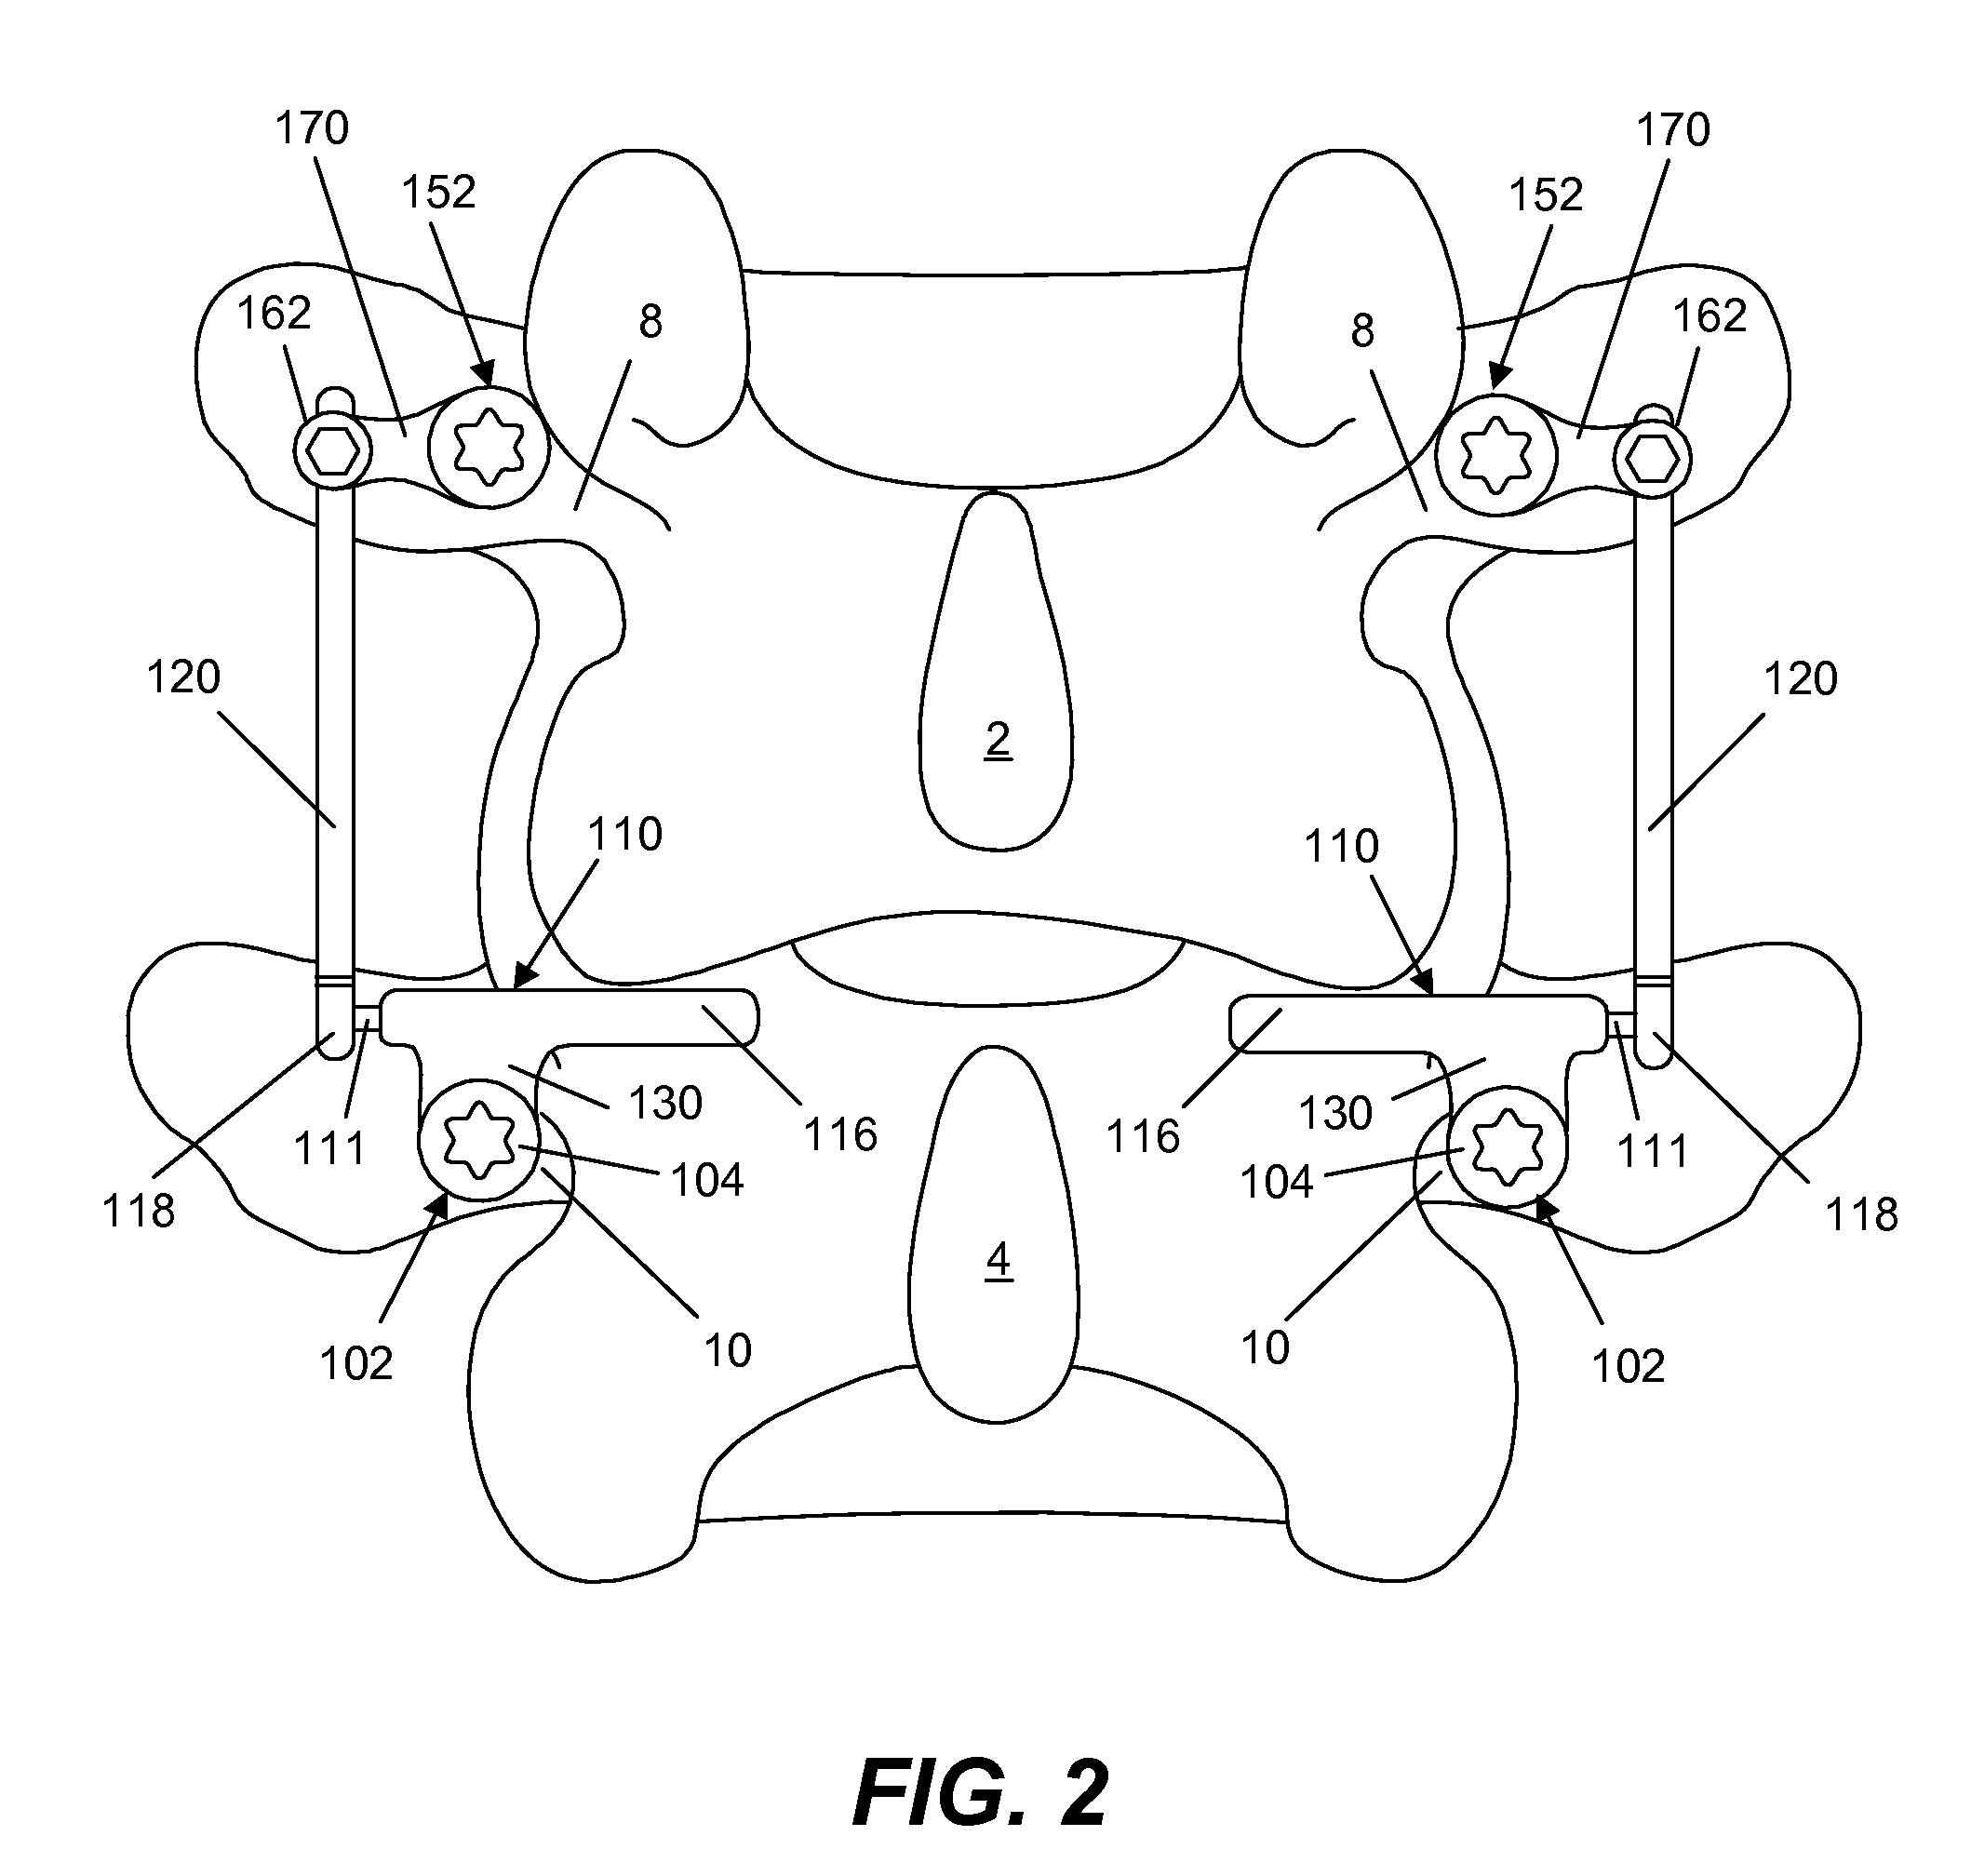 Spine implant with a deflection rod system including a deflection limiting shield associated with a bone screw and method